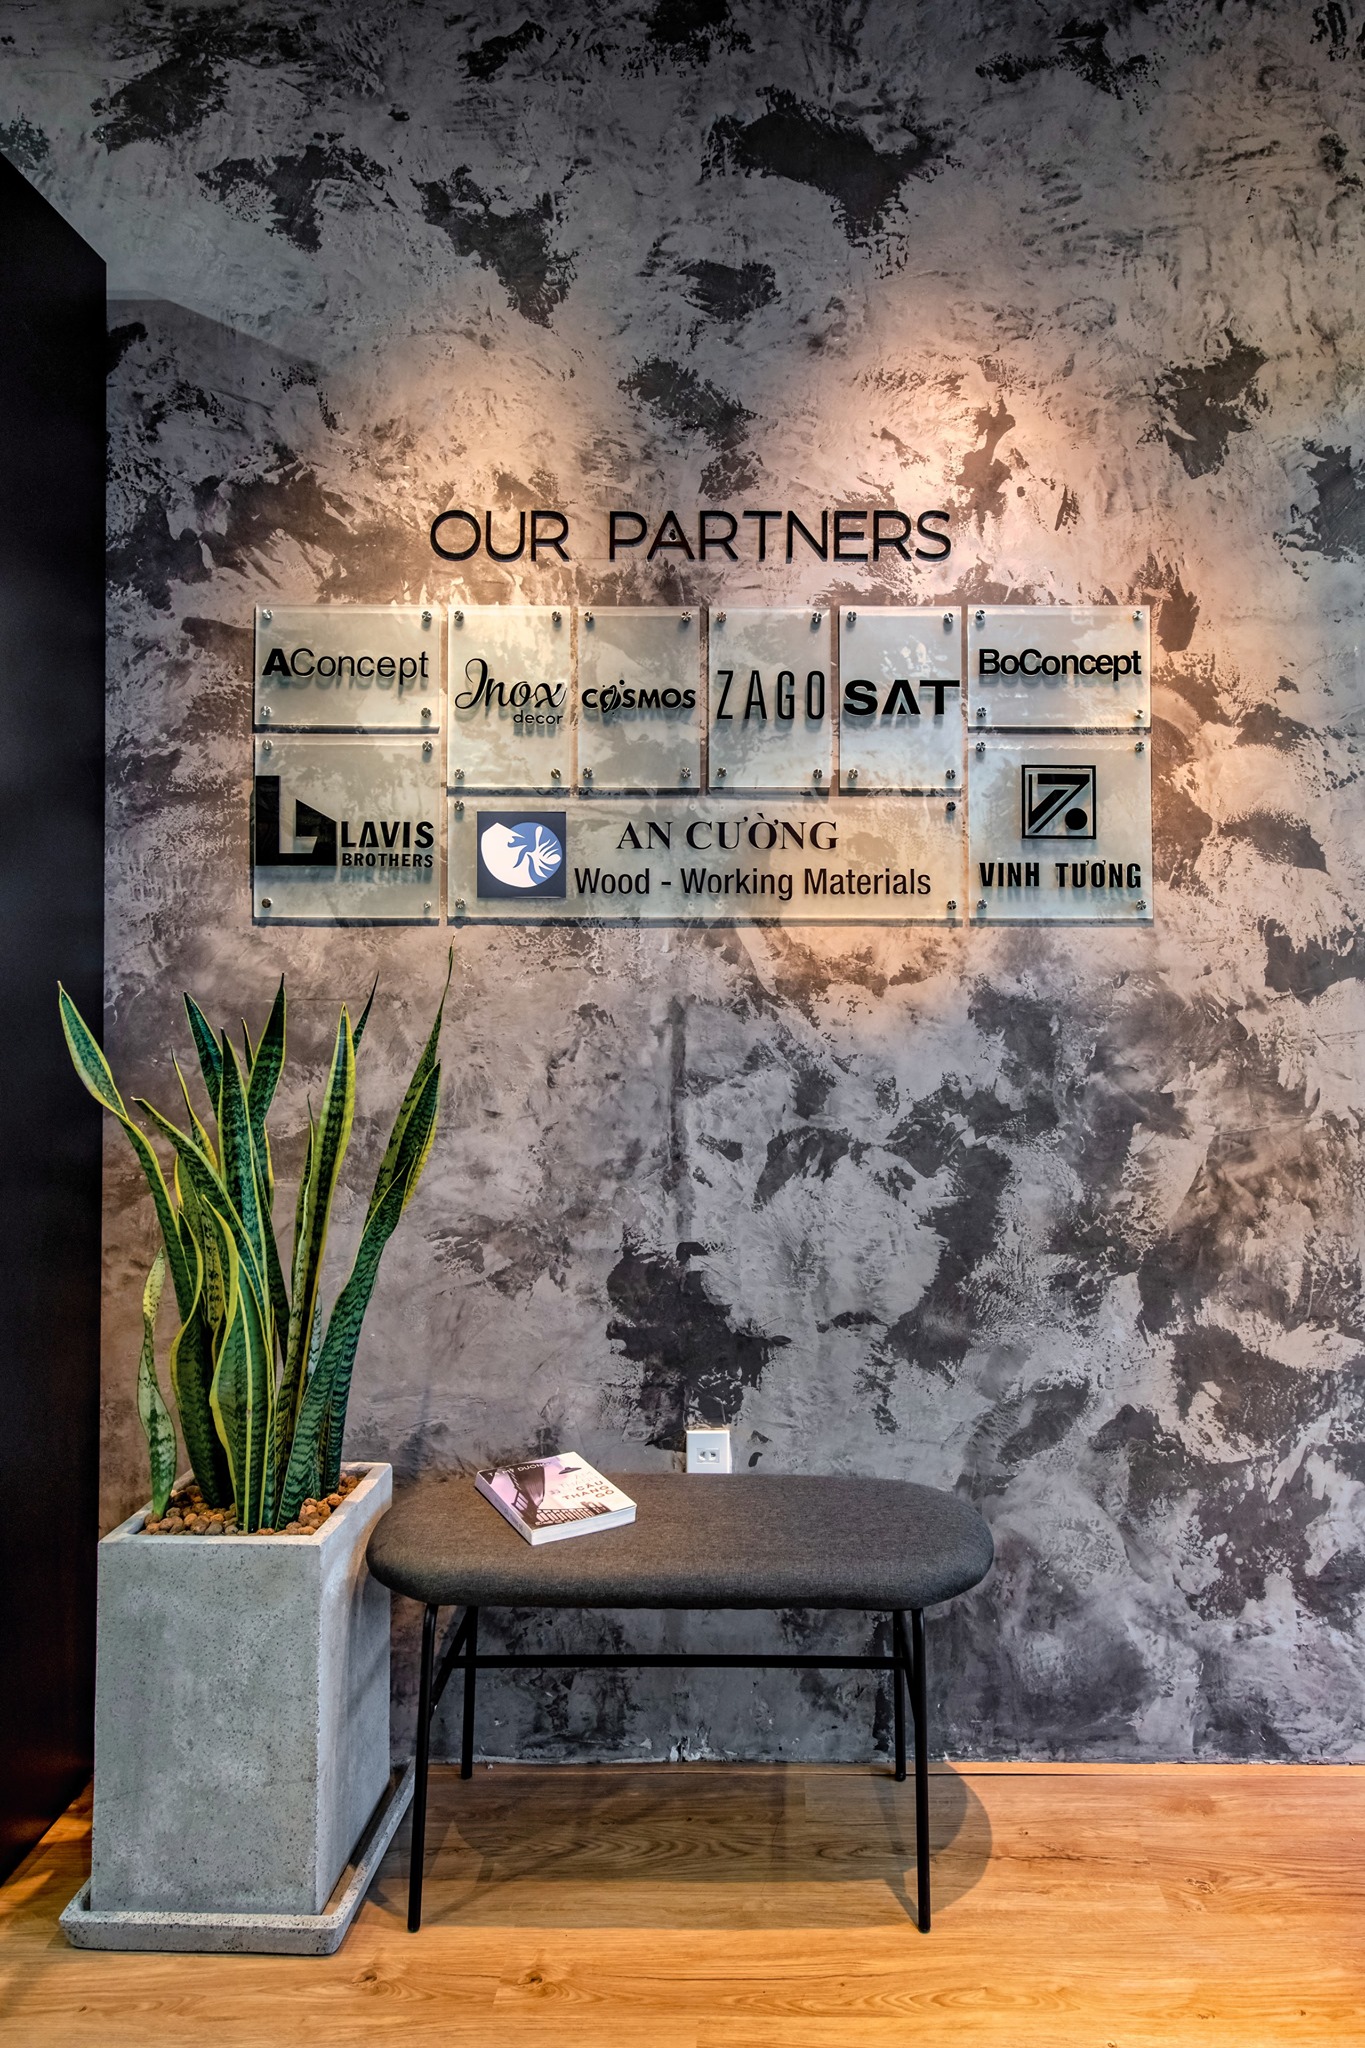 A+Partners Office